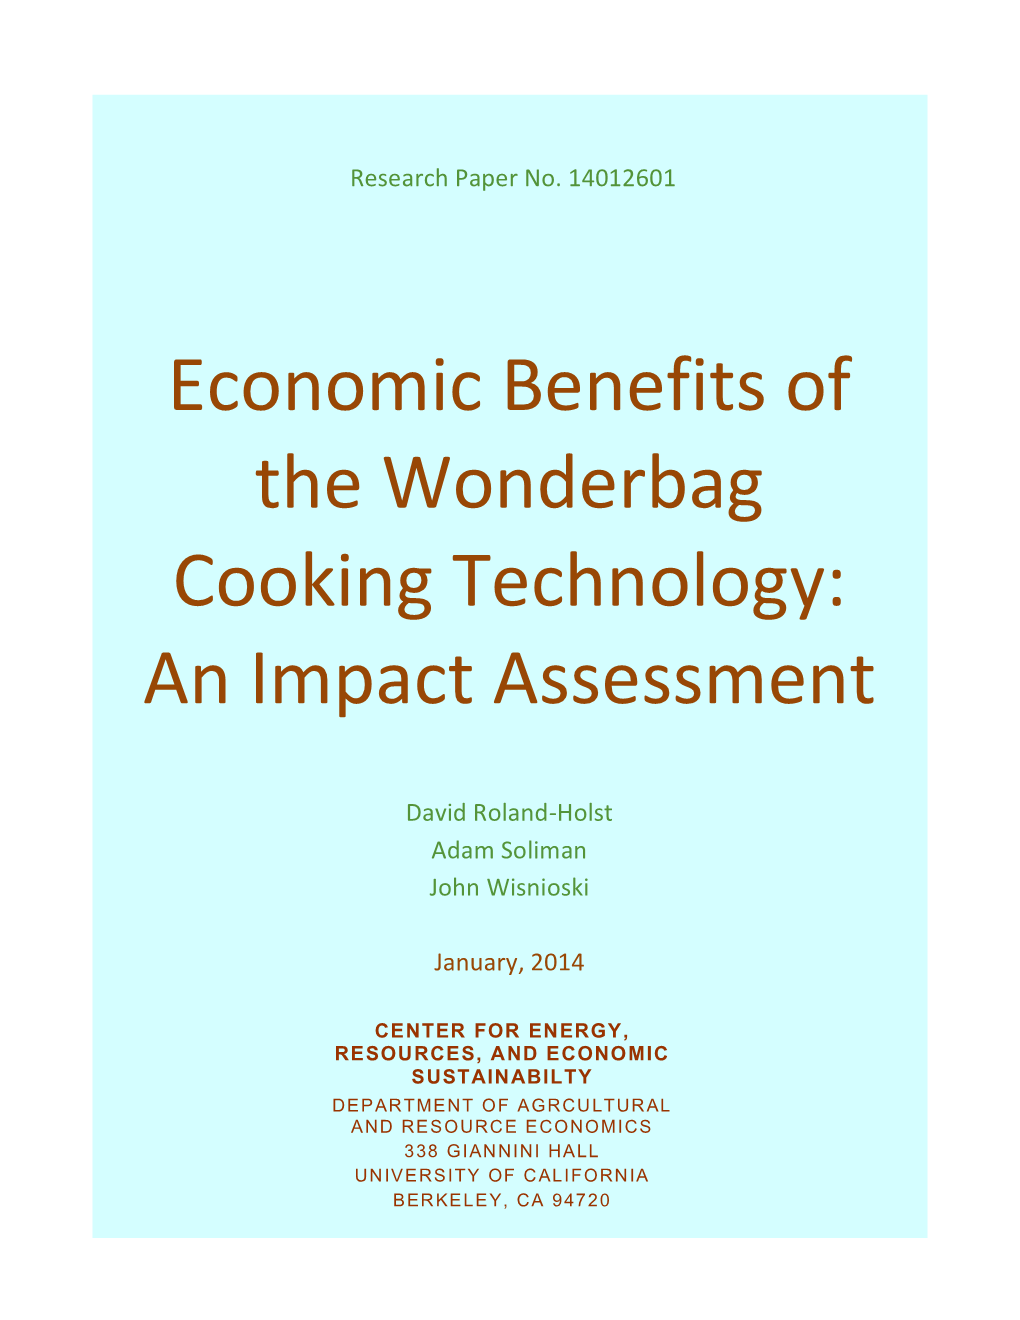 Economic Benefits of the Wonderbag Cooking Technology: an Impact Assessment